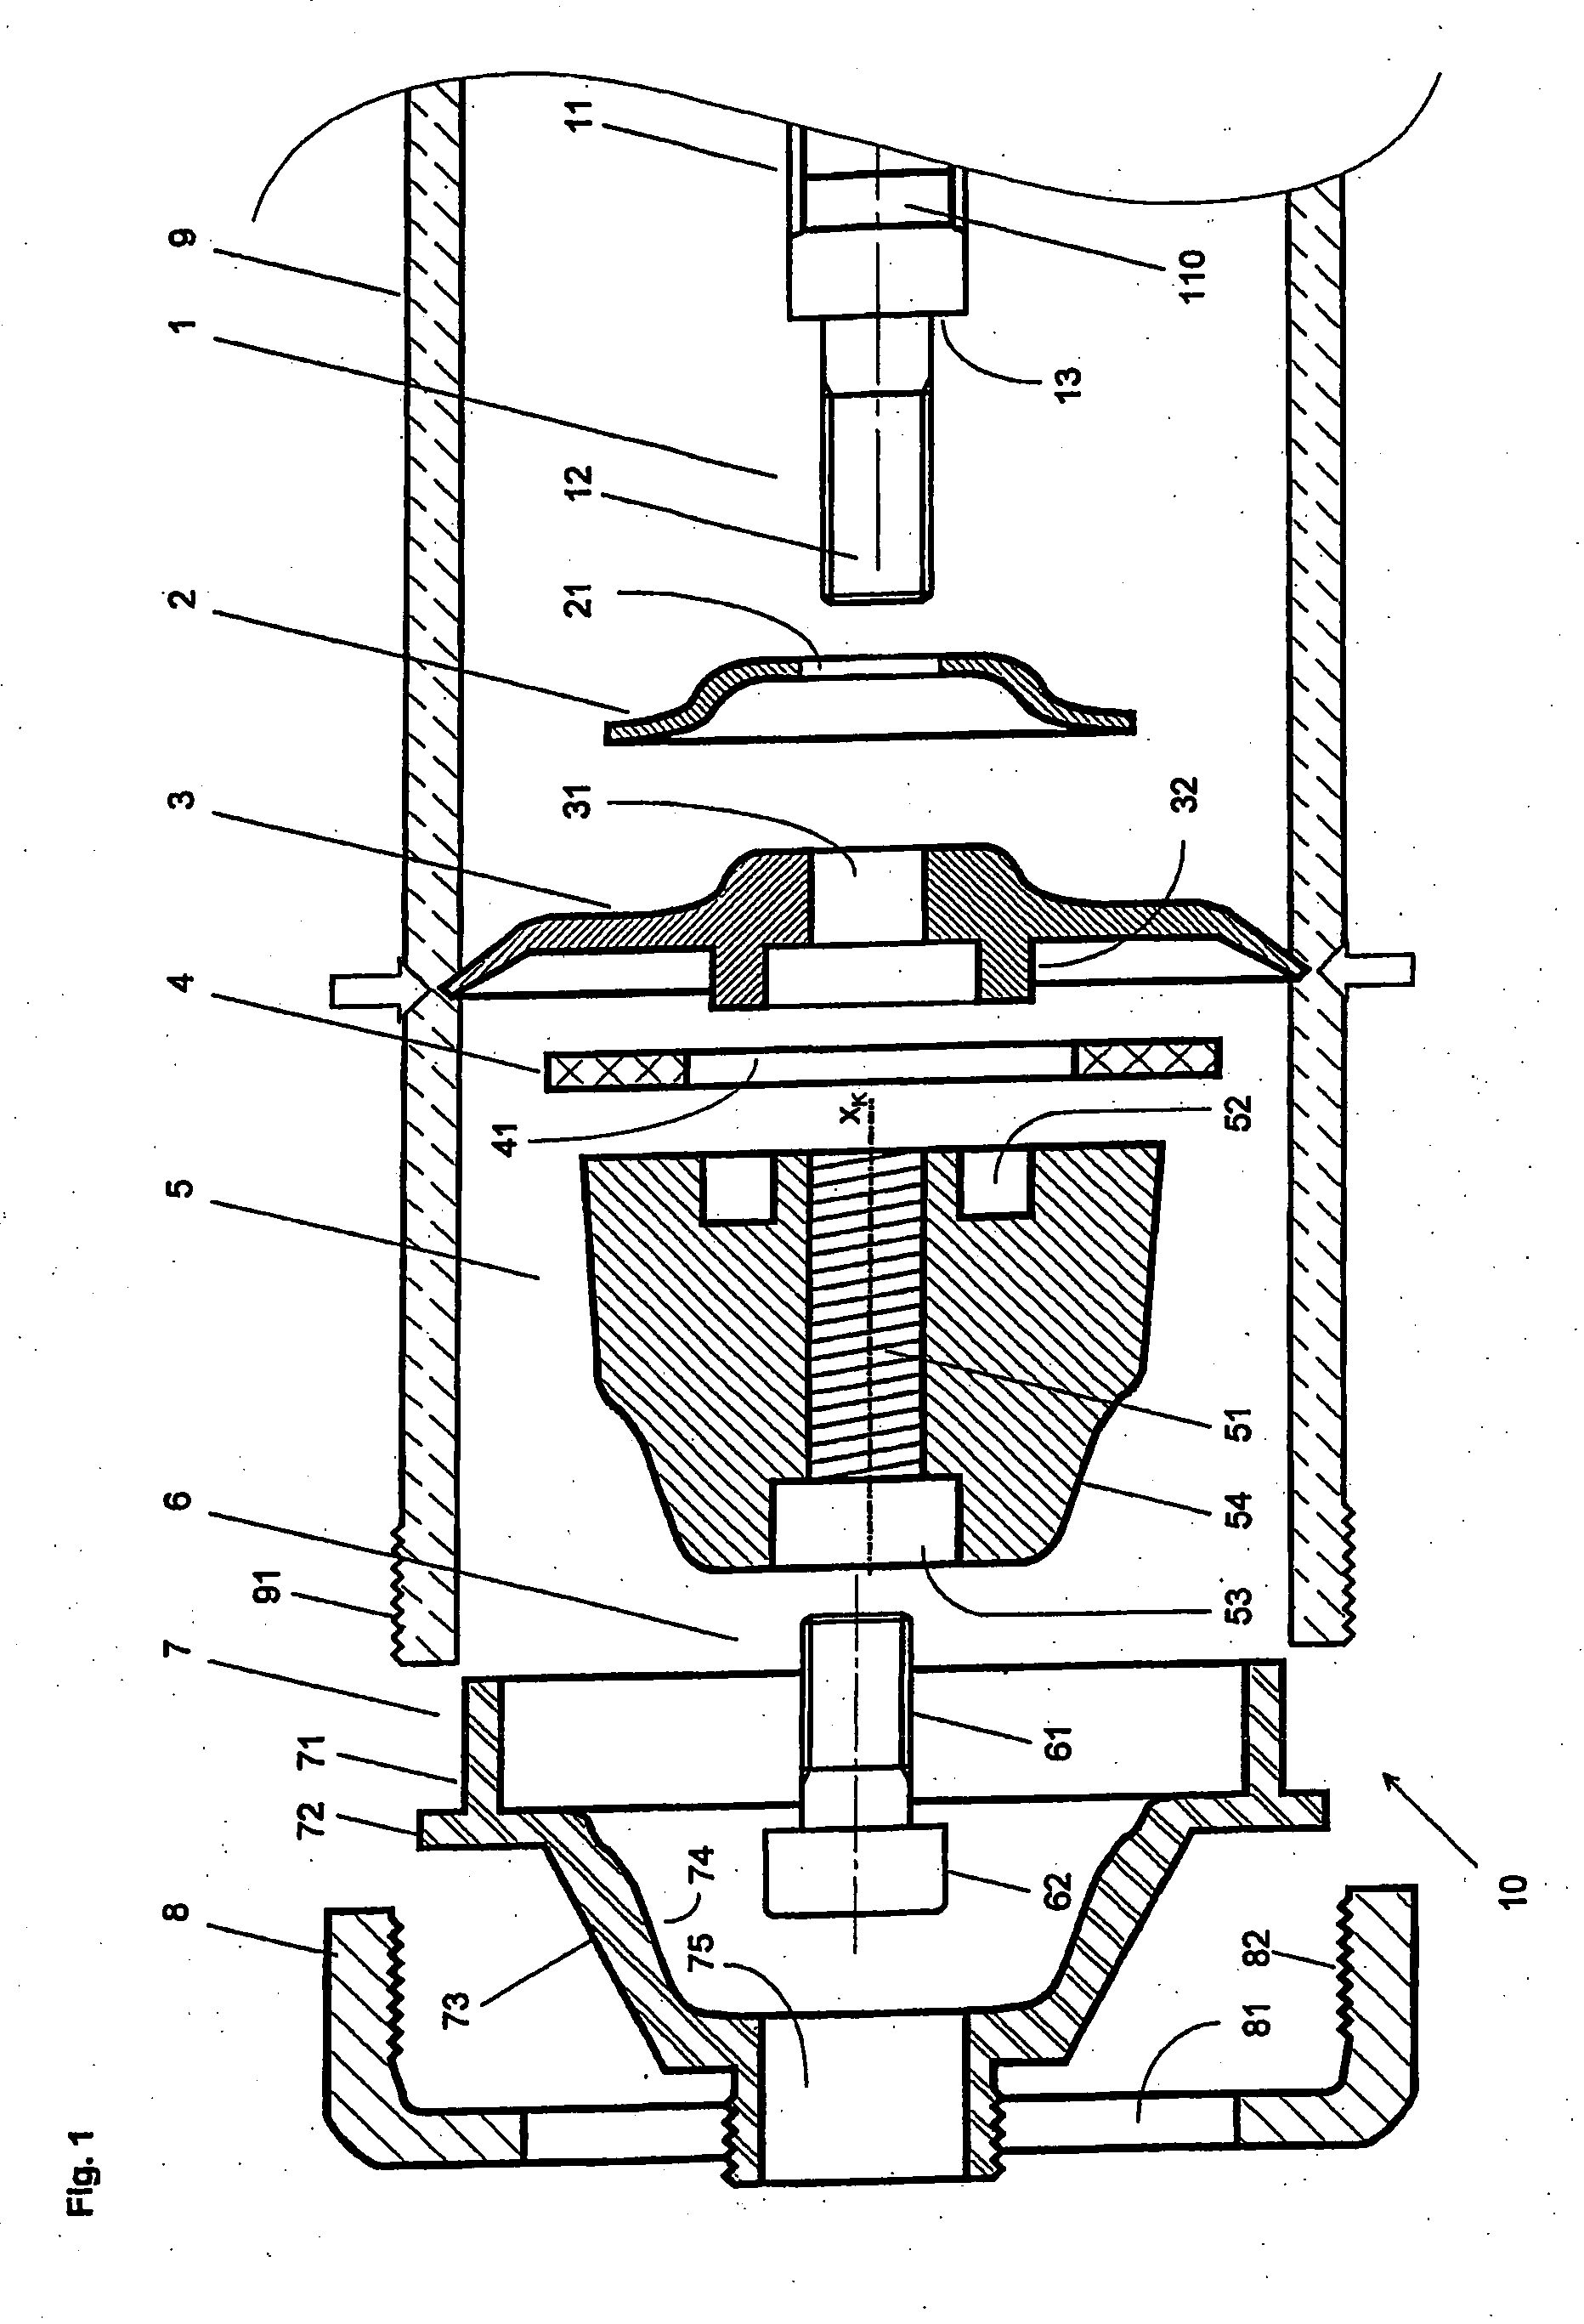 Device and method for the release of material for processing